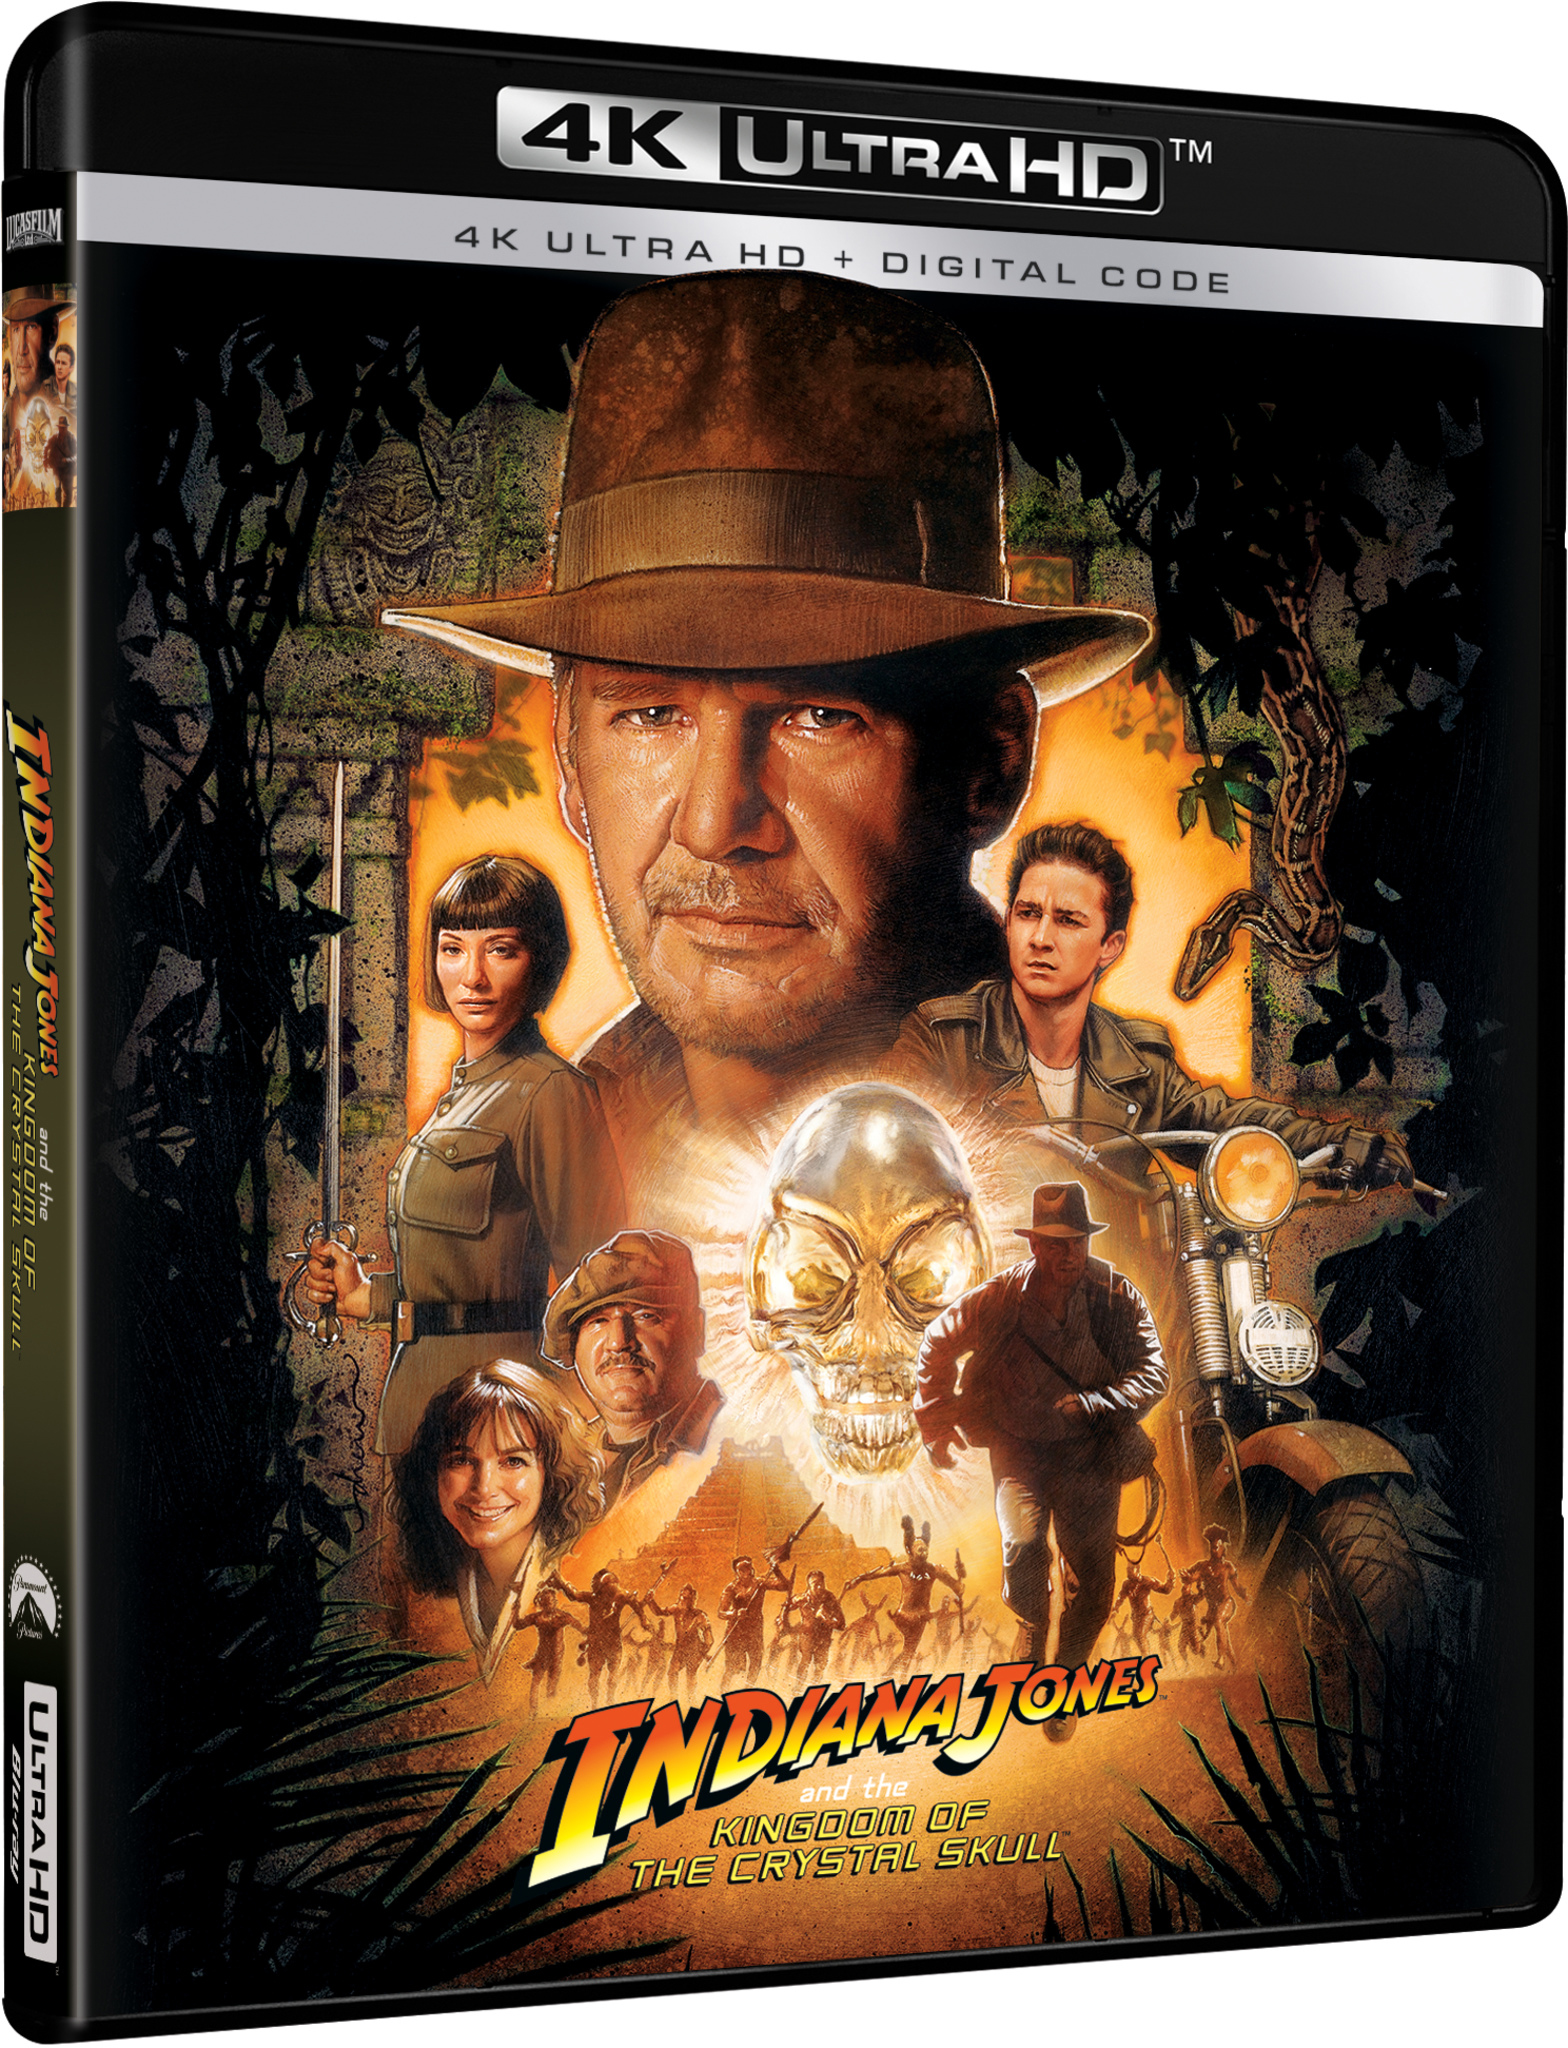 Indiana Jones and the Kingdom of the Crystal Skull [Includes Digital Copy]  [4K Ultra HD Blu-ray] [2008] - Best Buy